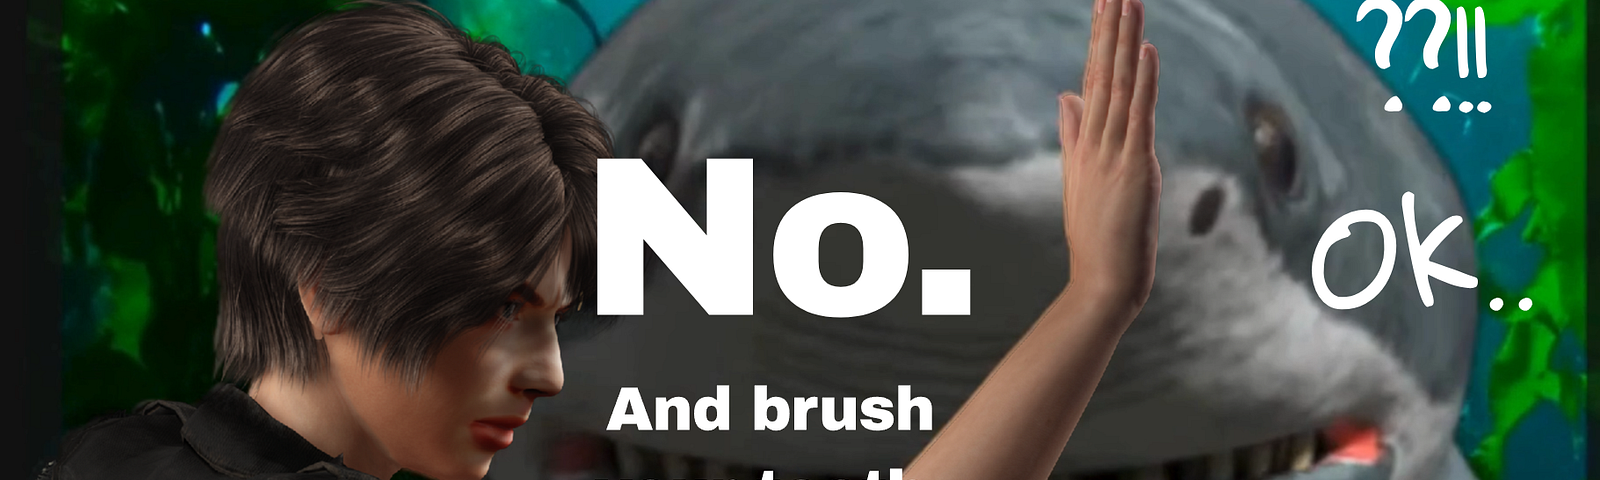 Young woman holding her palm in front of a ferocious shark. The caption reads ,”No.And brush your teeth”. It is a depiction of setting boundaries with toxic people.